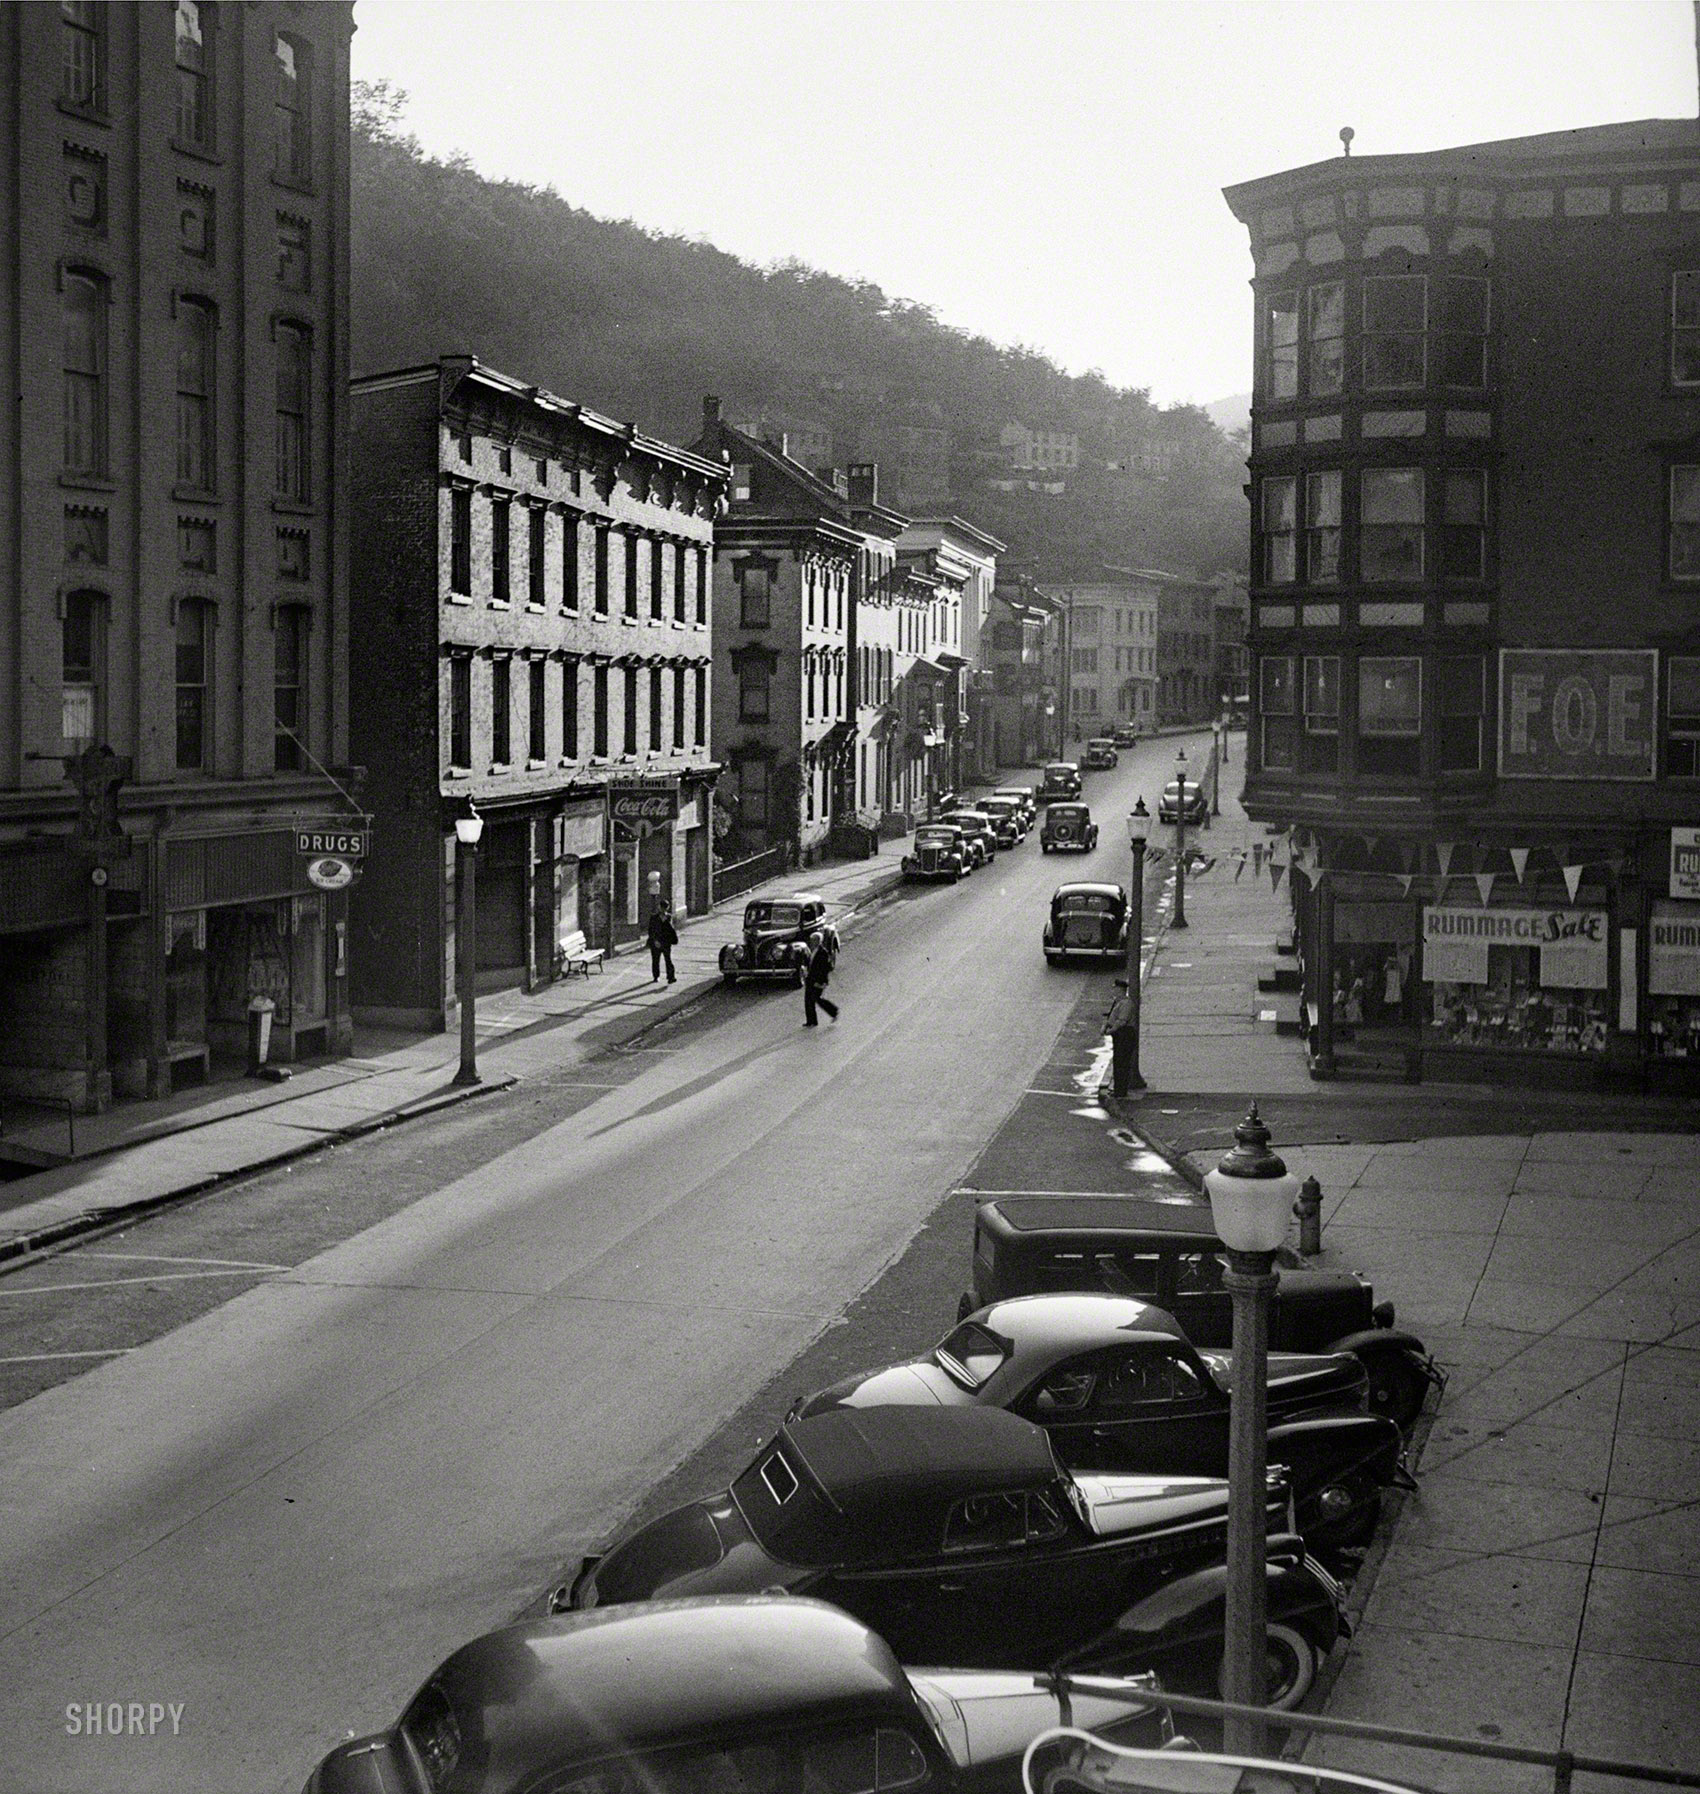 August 1940. "Street scene in Mauch Chunk, Pennsylvania." Paging Edward Hopper. Medium-format negative by Jack Delano. View full size.